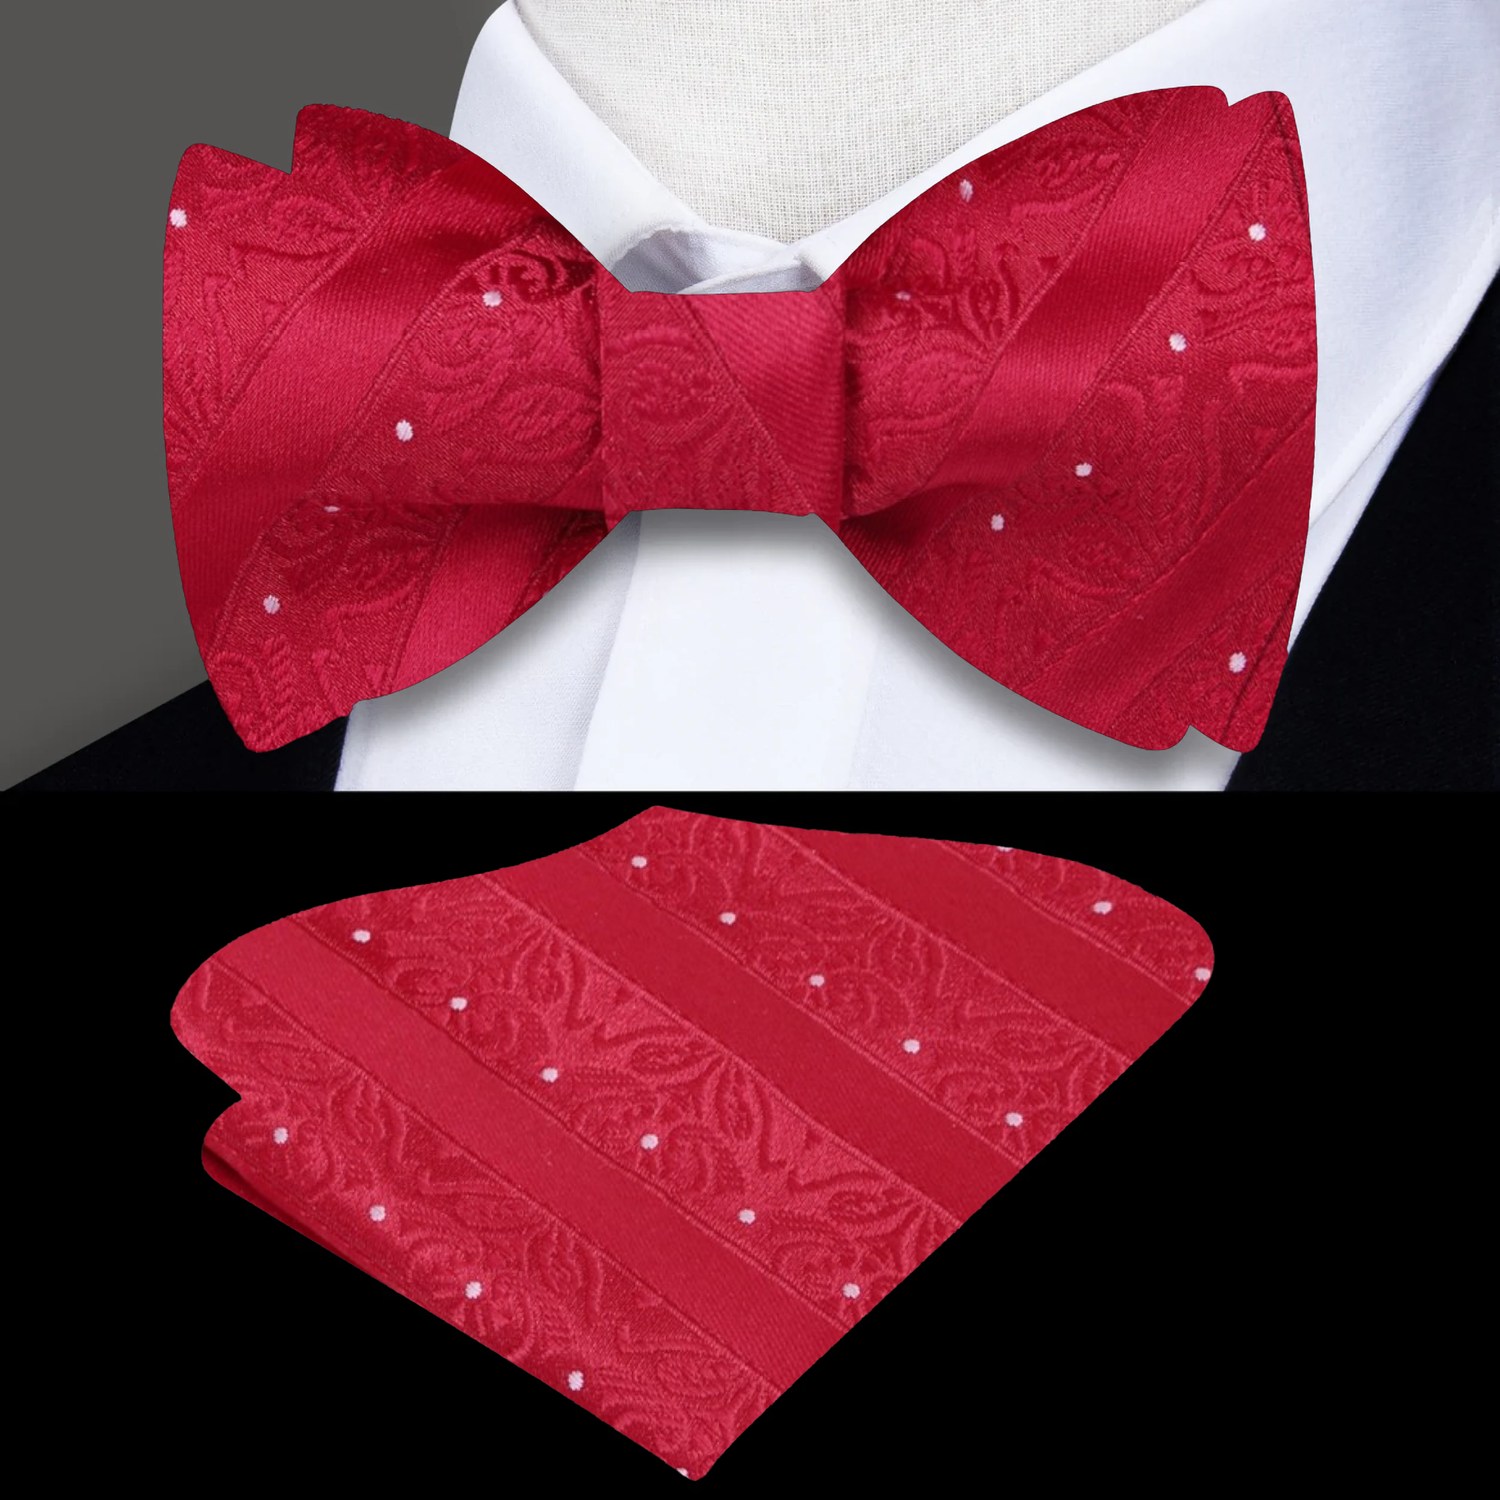 Red Bow Tie with Floral Texture and Pocket Square